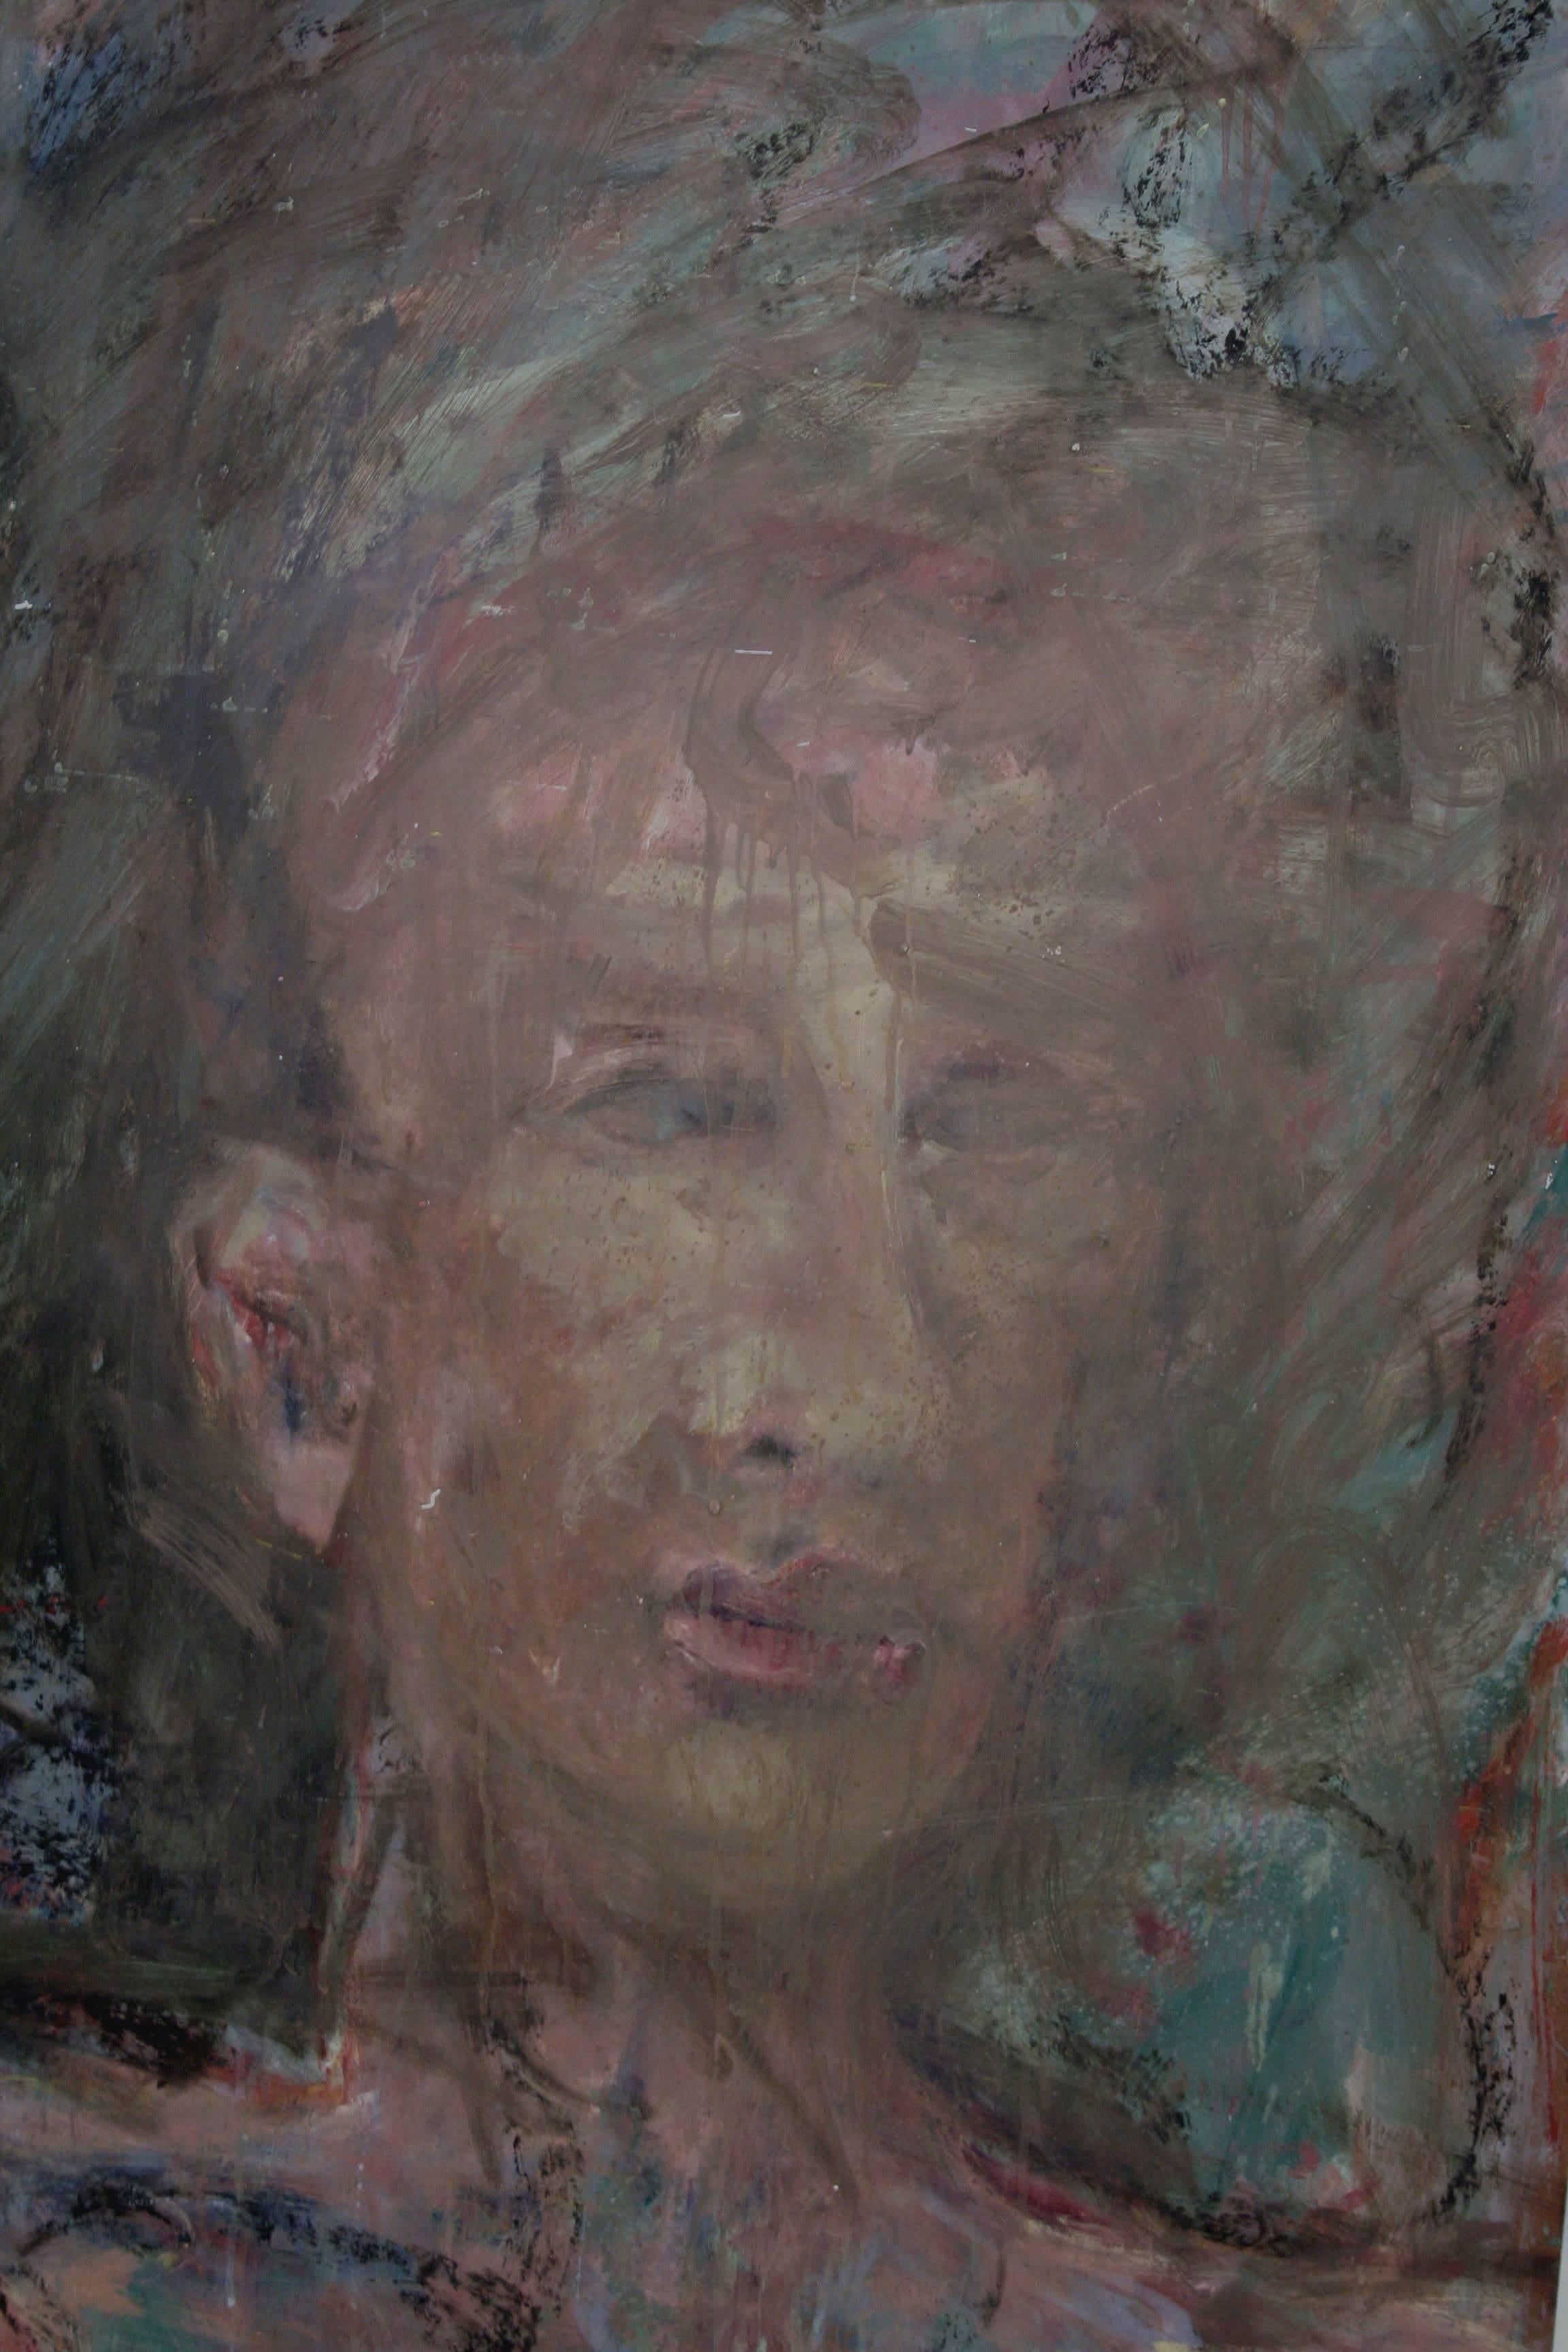 Abstract Expressionist Portrait of a Man  - Painting by Daniel David Fuentes